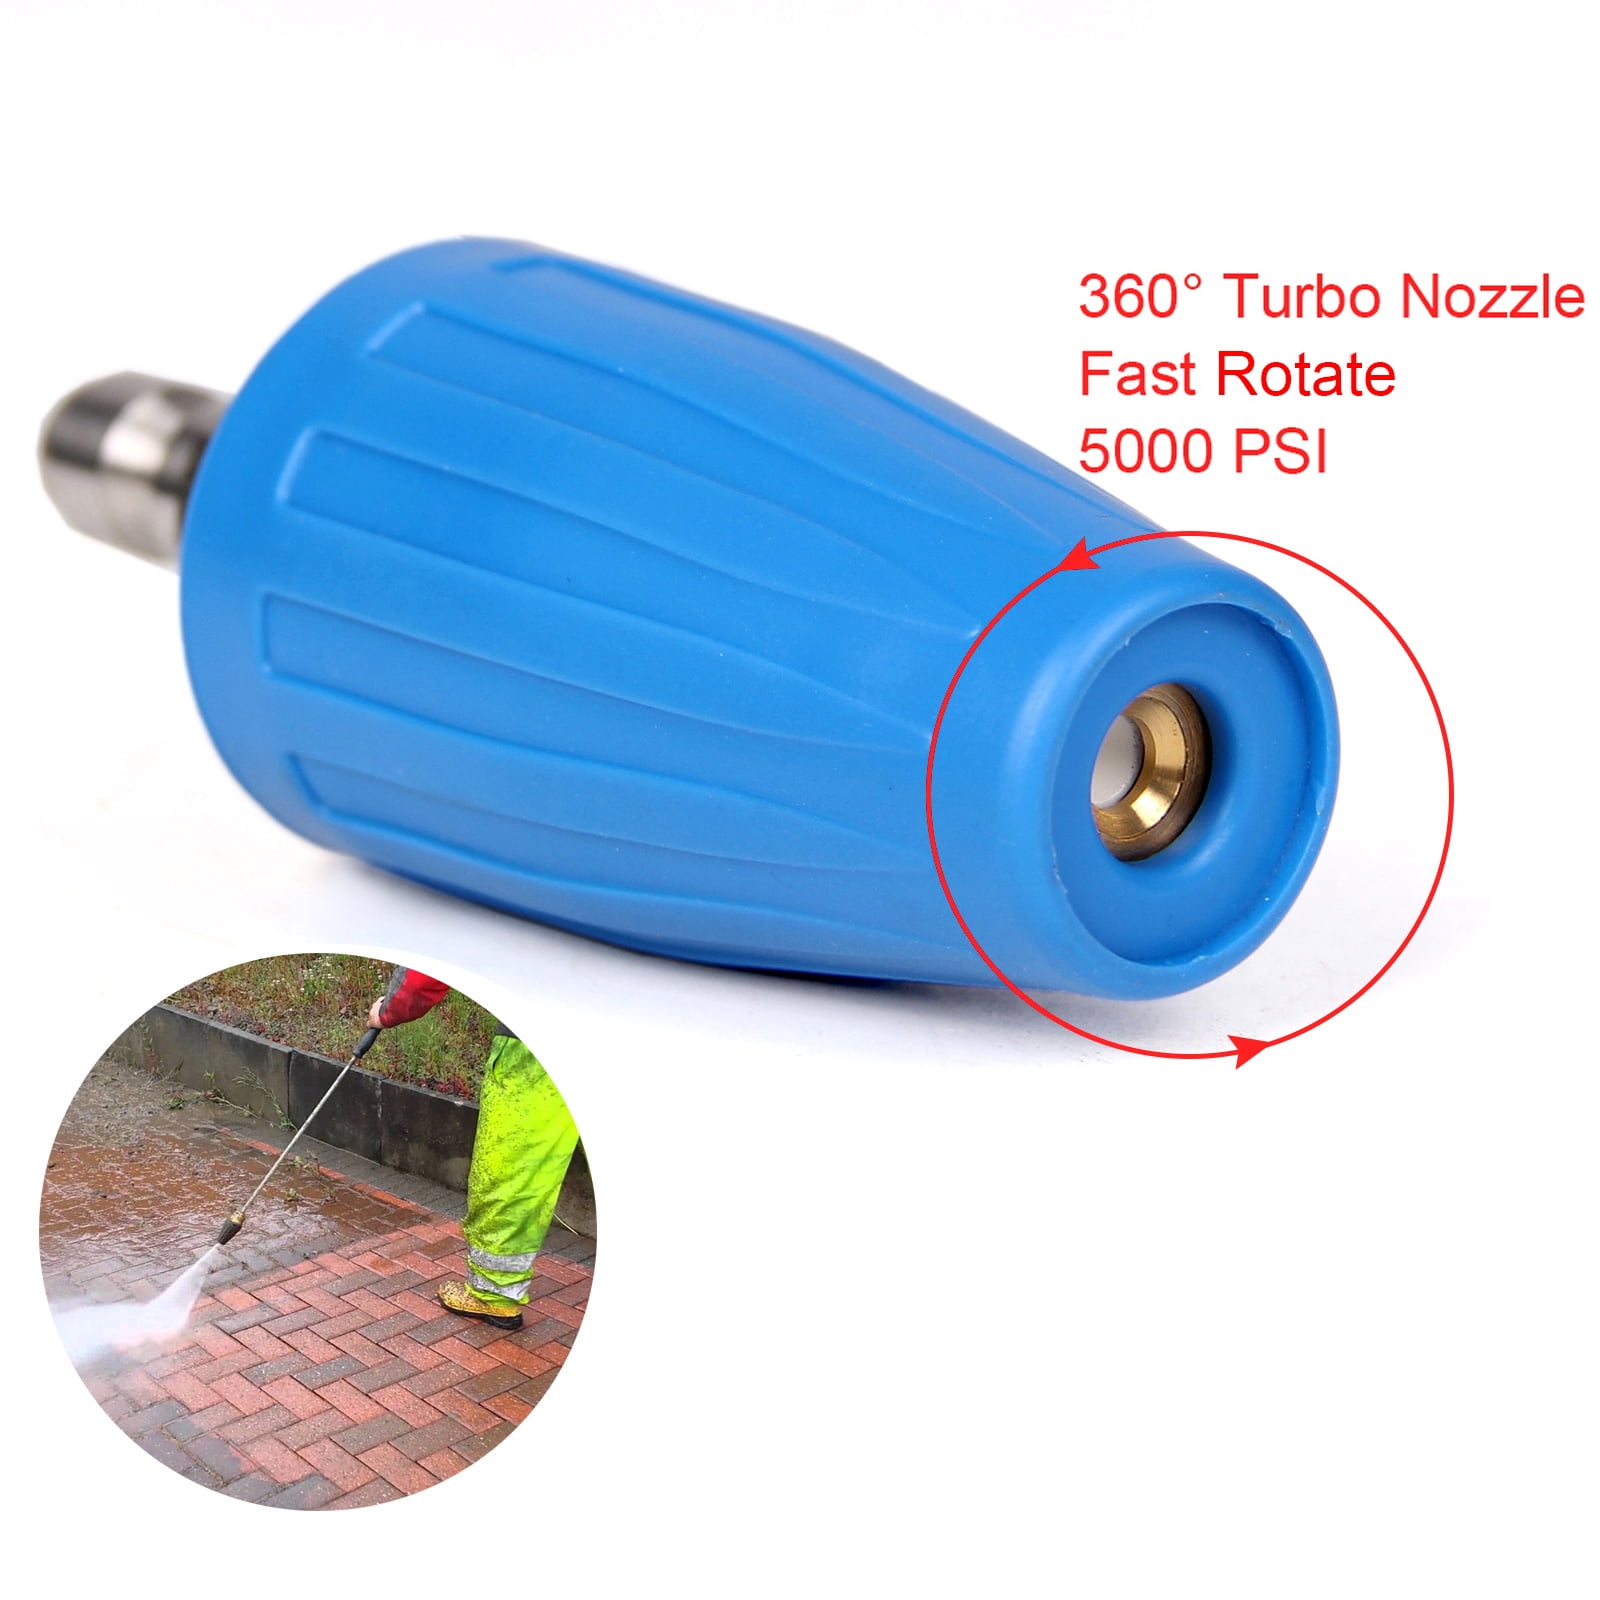 High Pressure Washer Turbo Head Nozzle Washer Cleaner Spray Rotary Rotating F0B7 